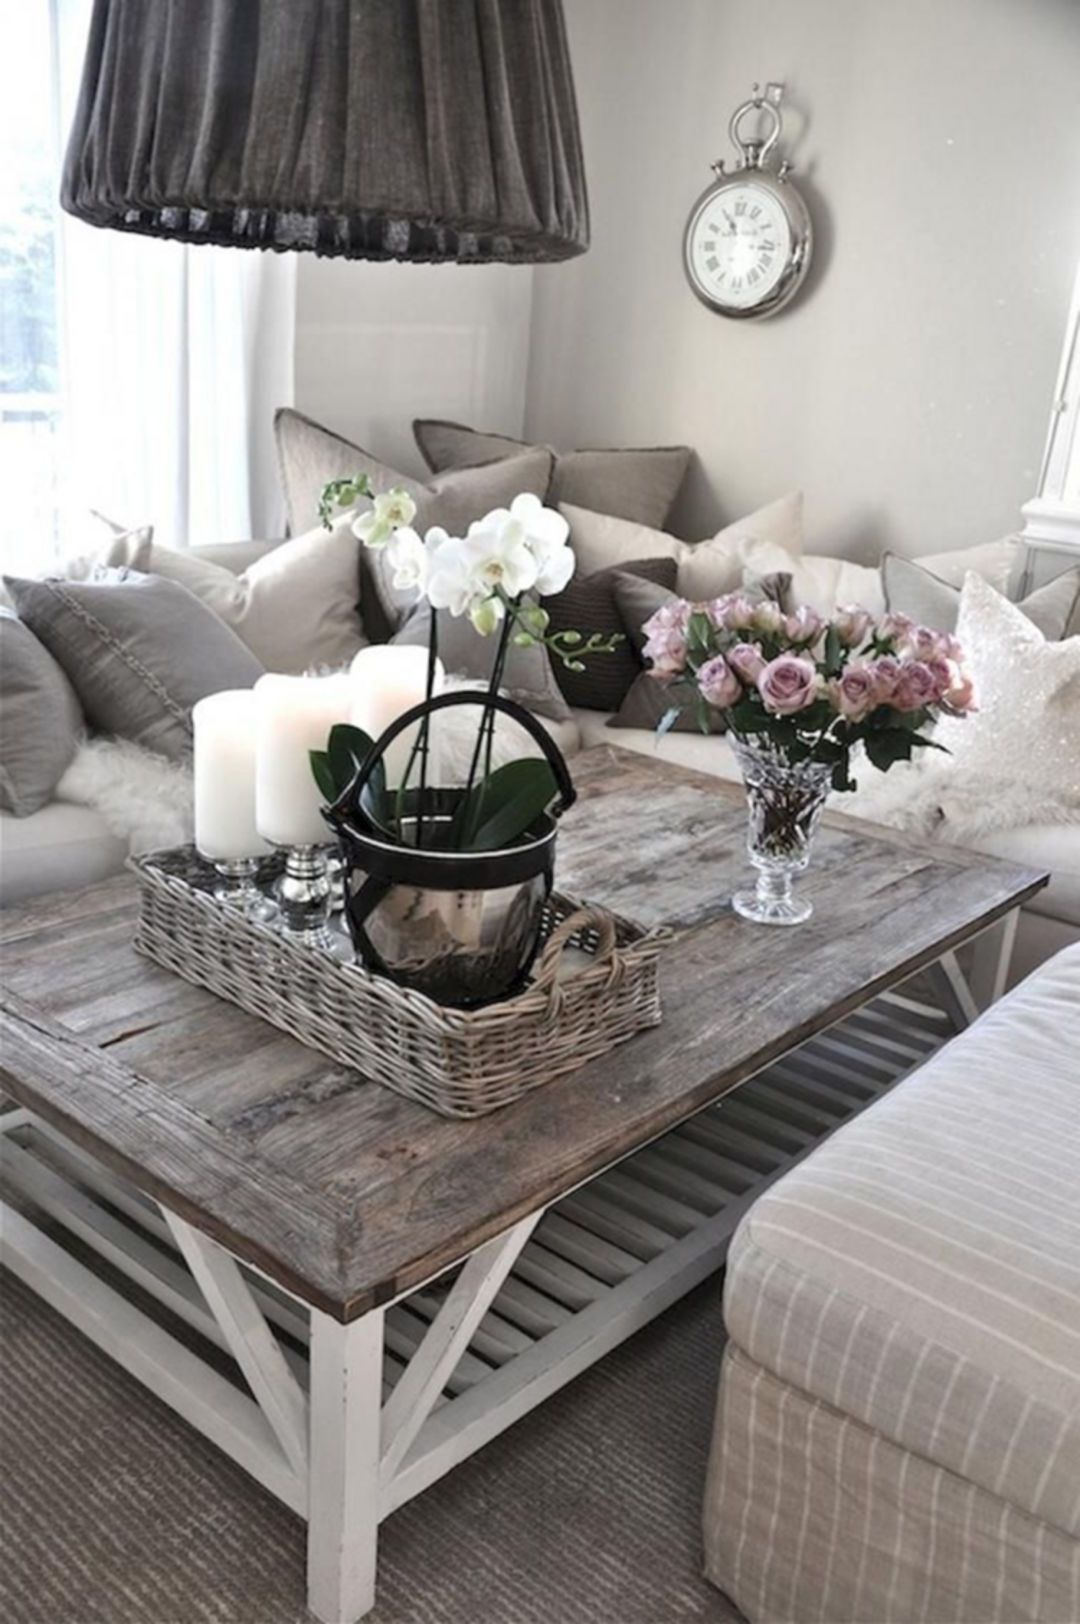 Adorable 25+ Great Farmhouse Coffee Table Design And Decor Ideas Https With Latest Living Room Farmhouse Coffee Tables (View 4 of 15)